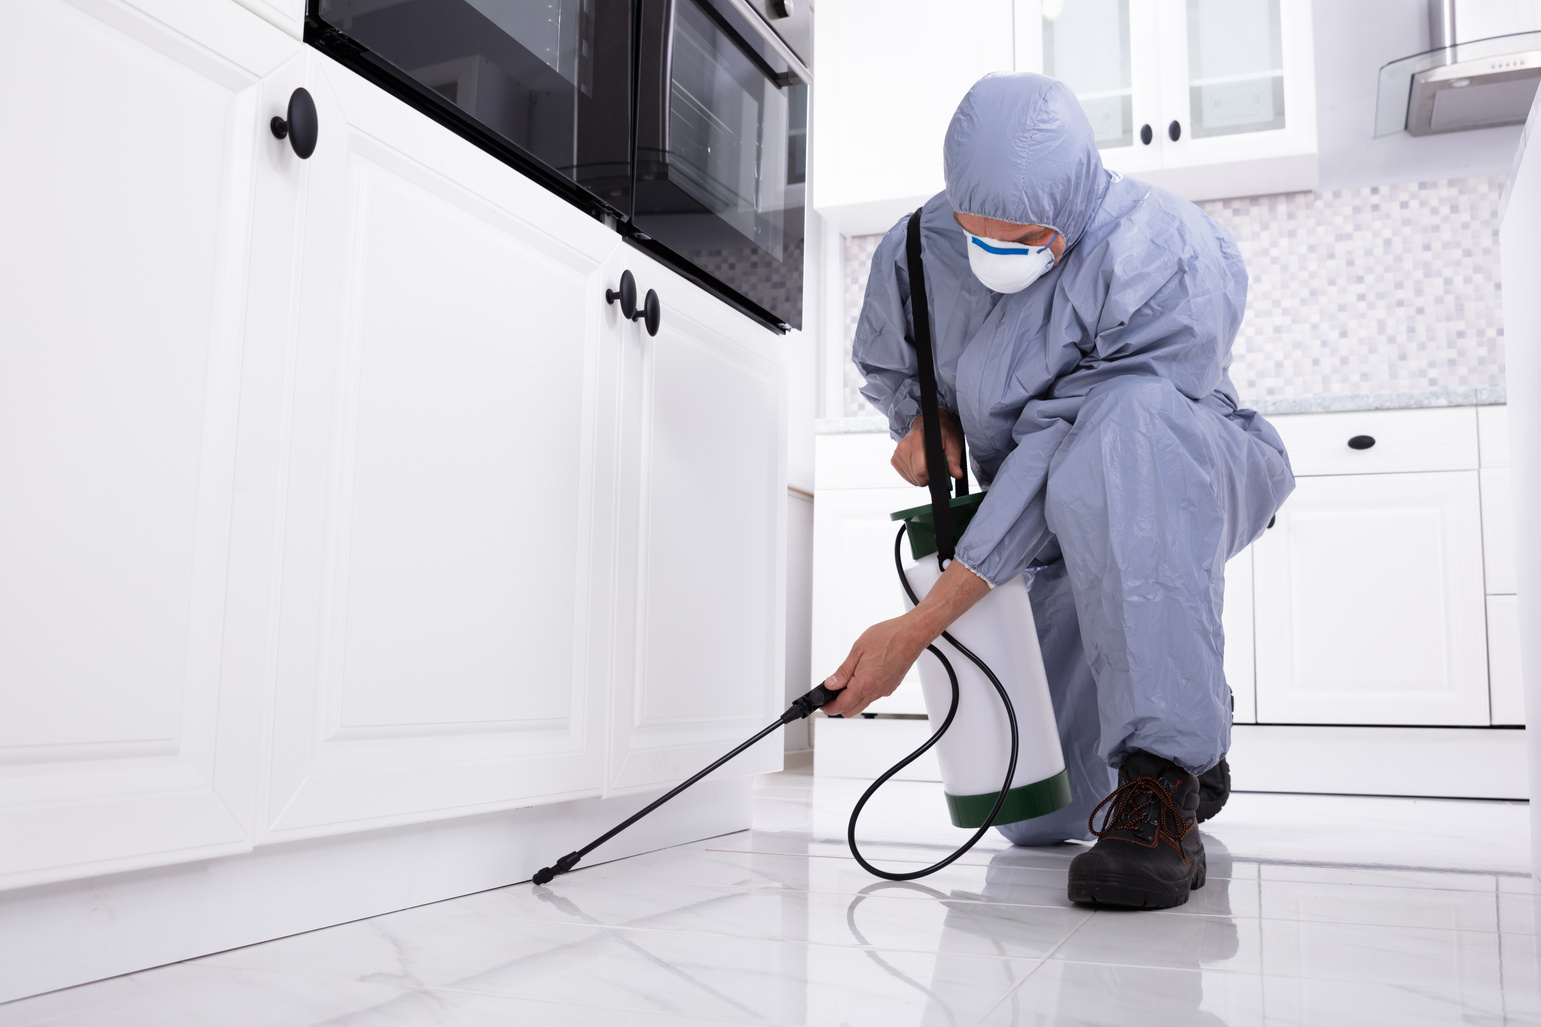 Pest Control Worker Spraying Pesticide On White Cabinet